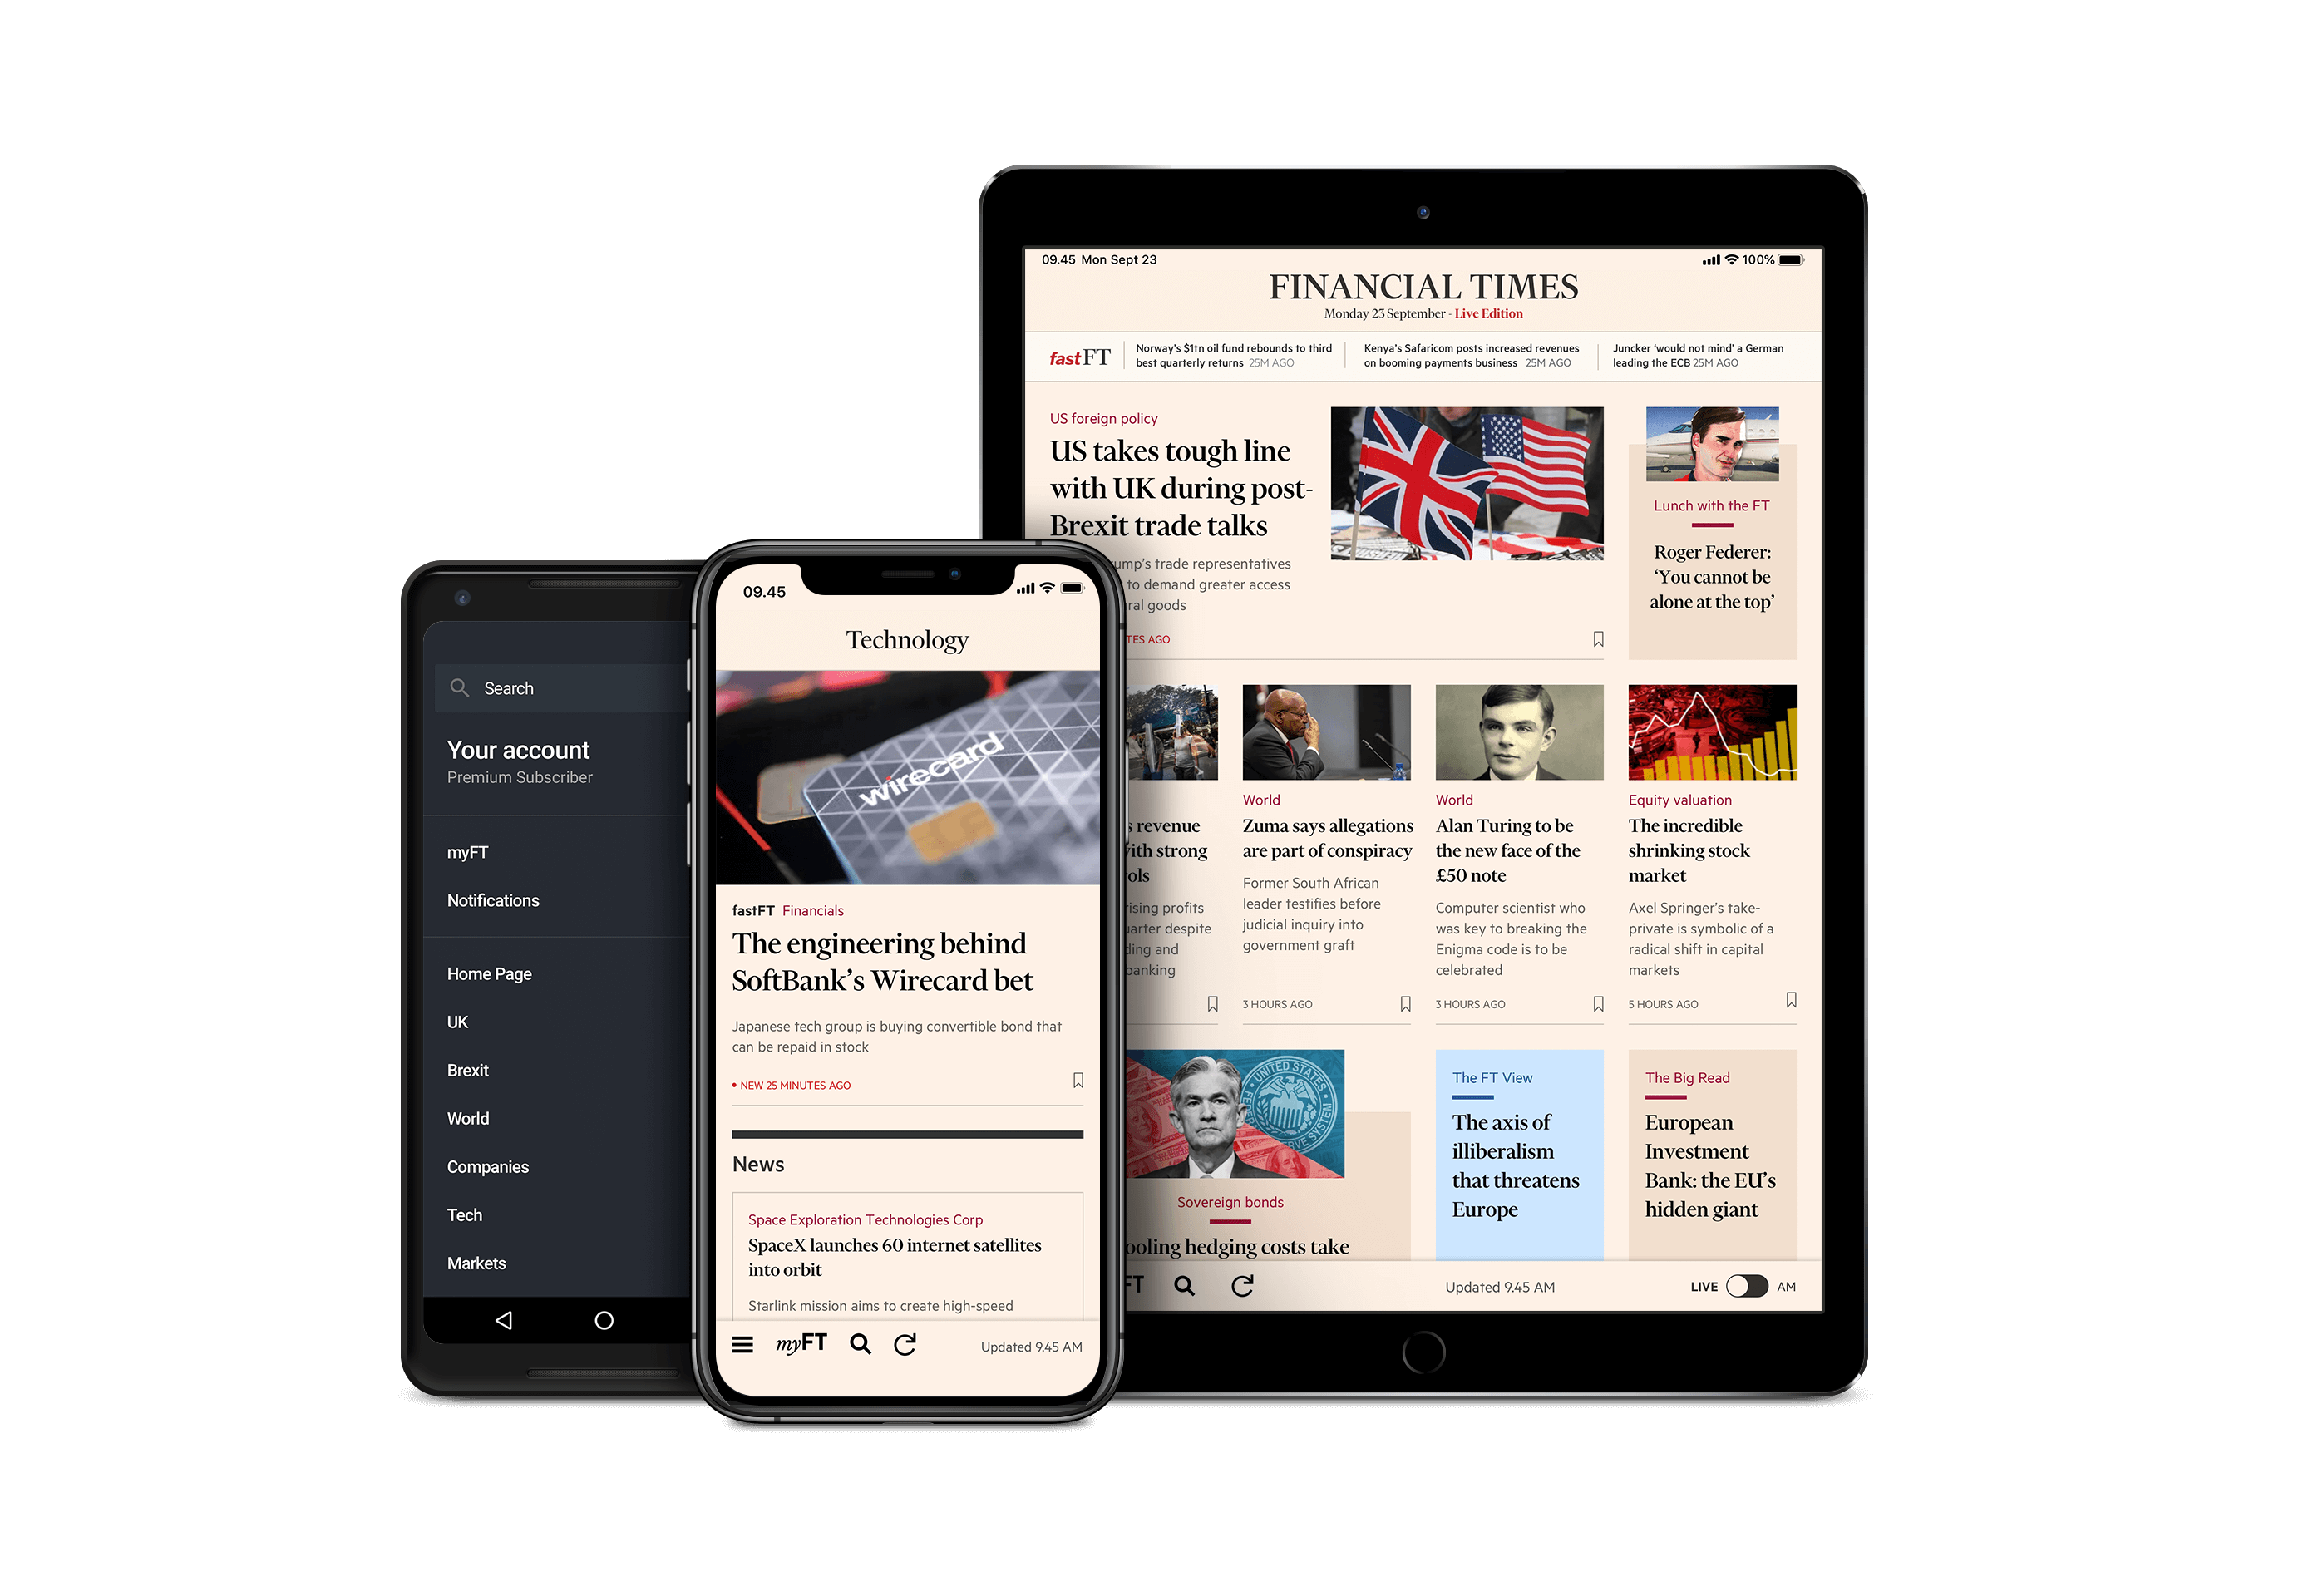 Photograph of a smart phone and an tablet displaying the FT.com front page